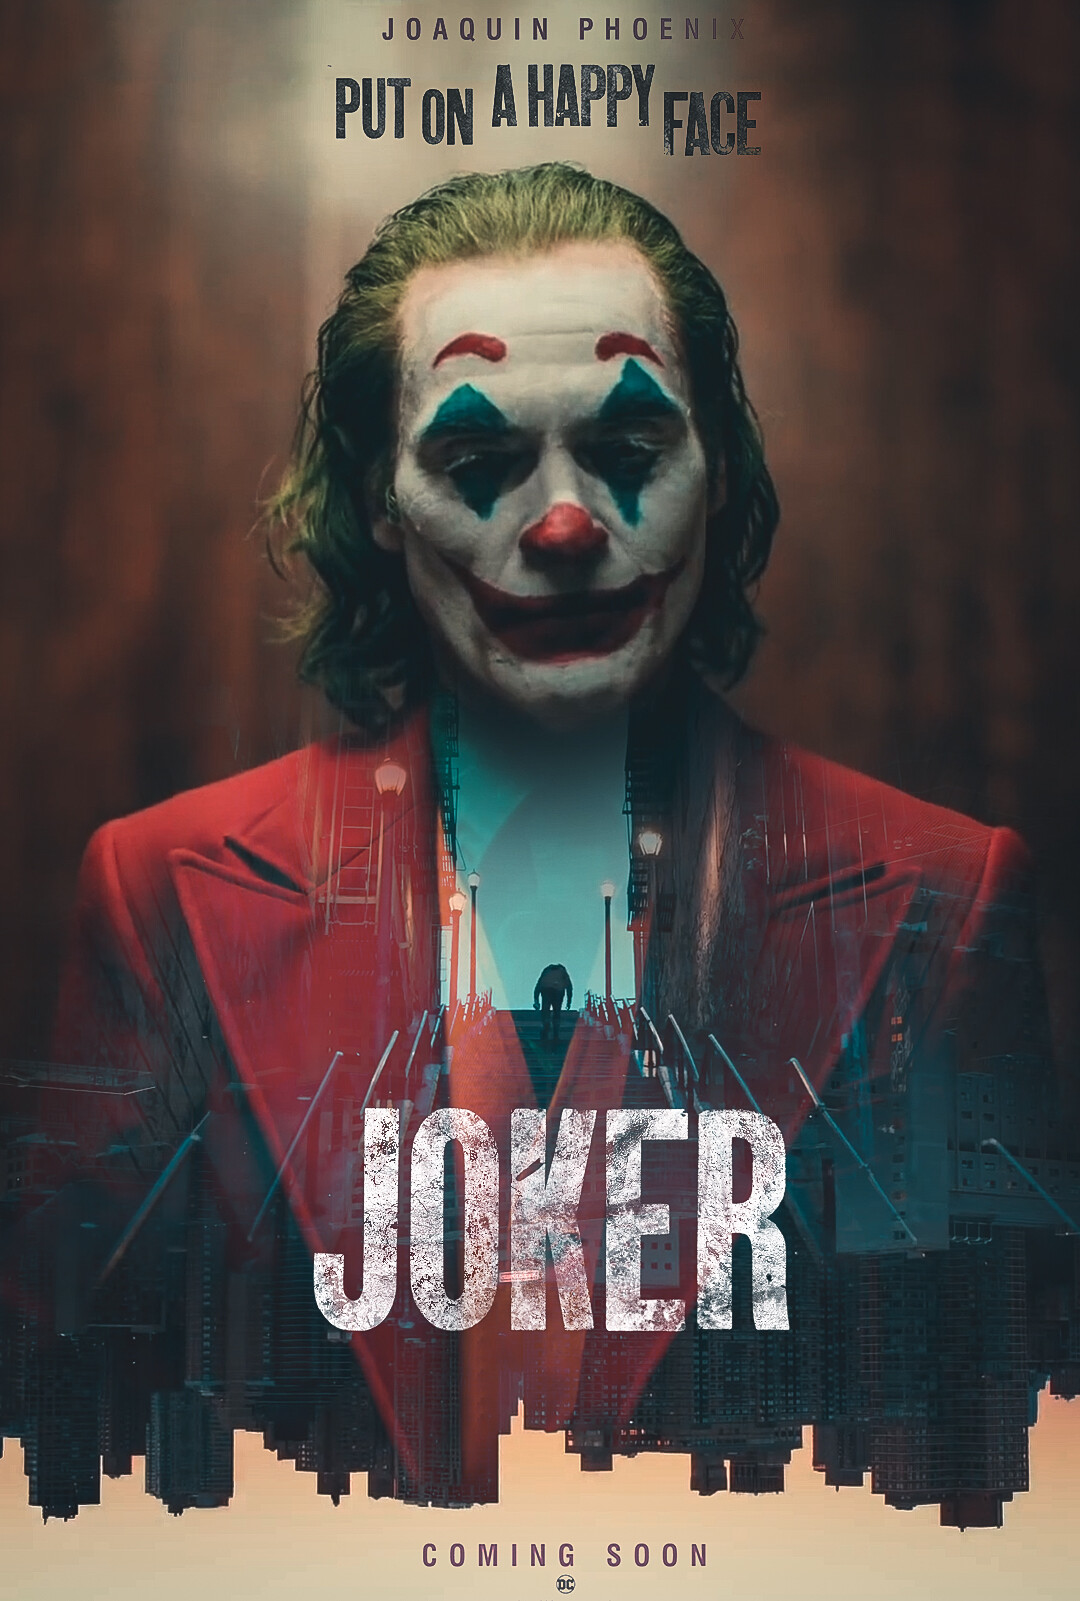 47 HQ Pictures The New Joker Movie Poster : Joker 2019 Movie Posters 3 Of 6